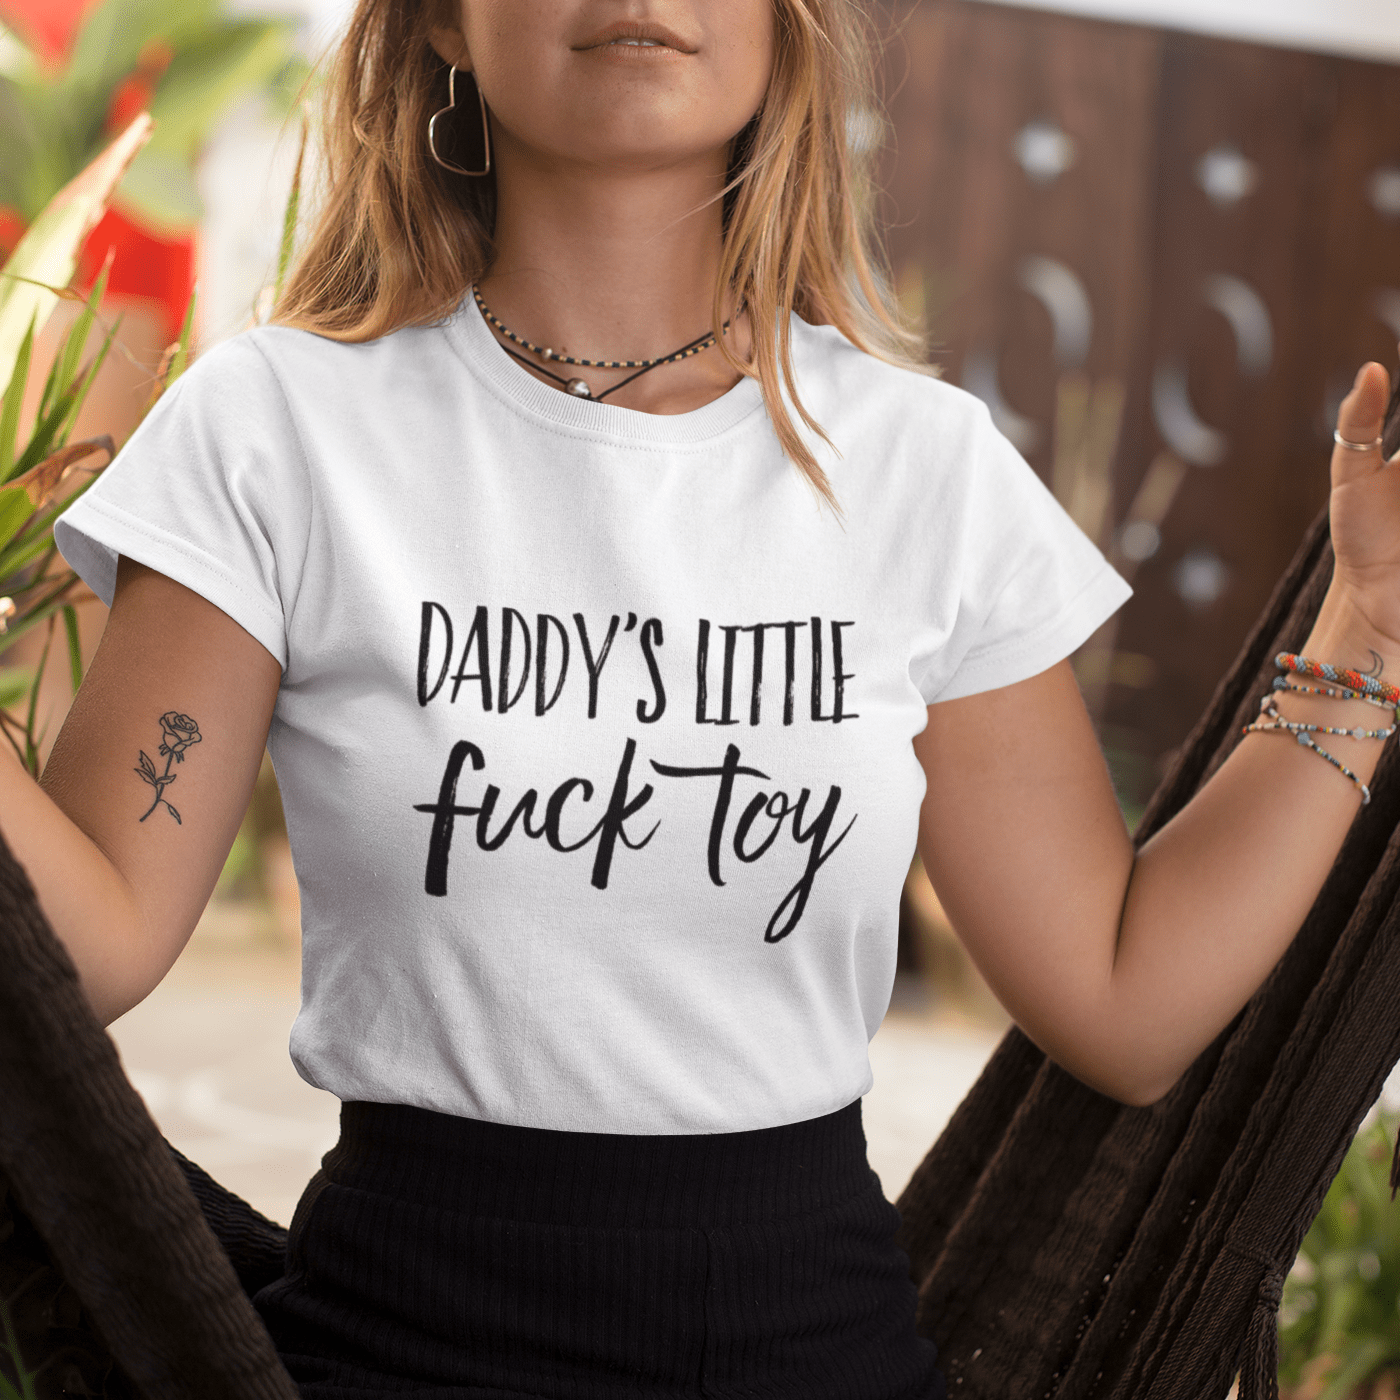 Kinky Cloth Top Daddy's Little Fuck Toy Top